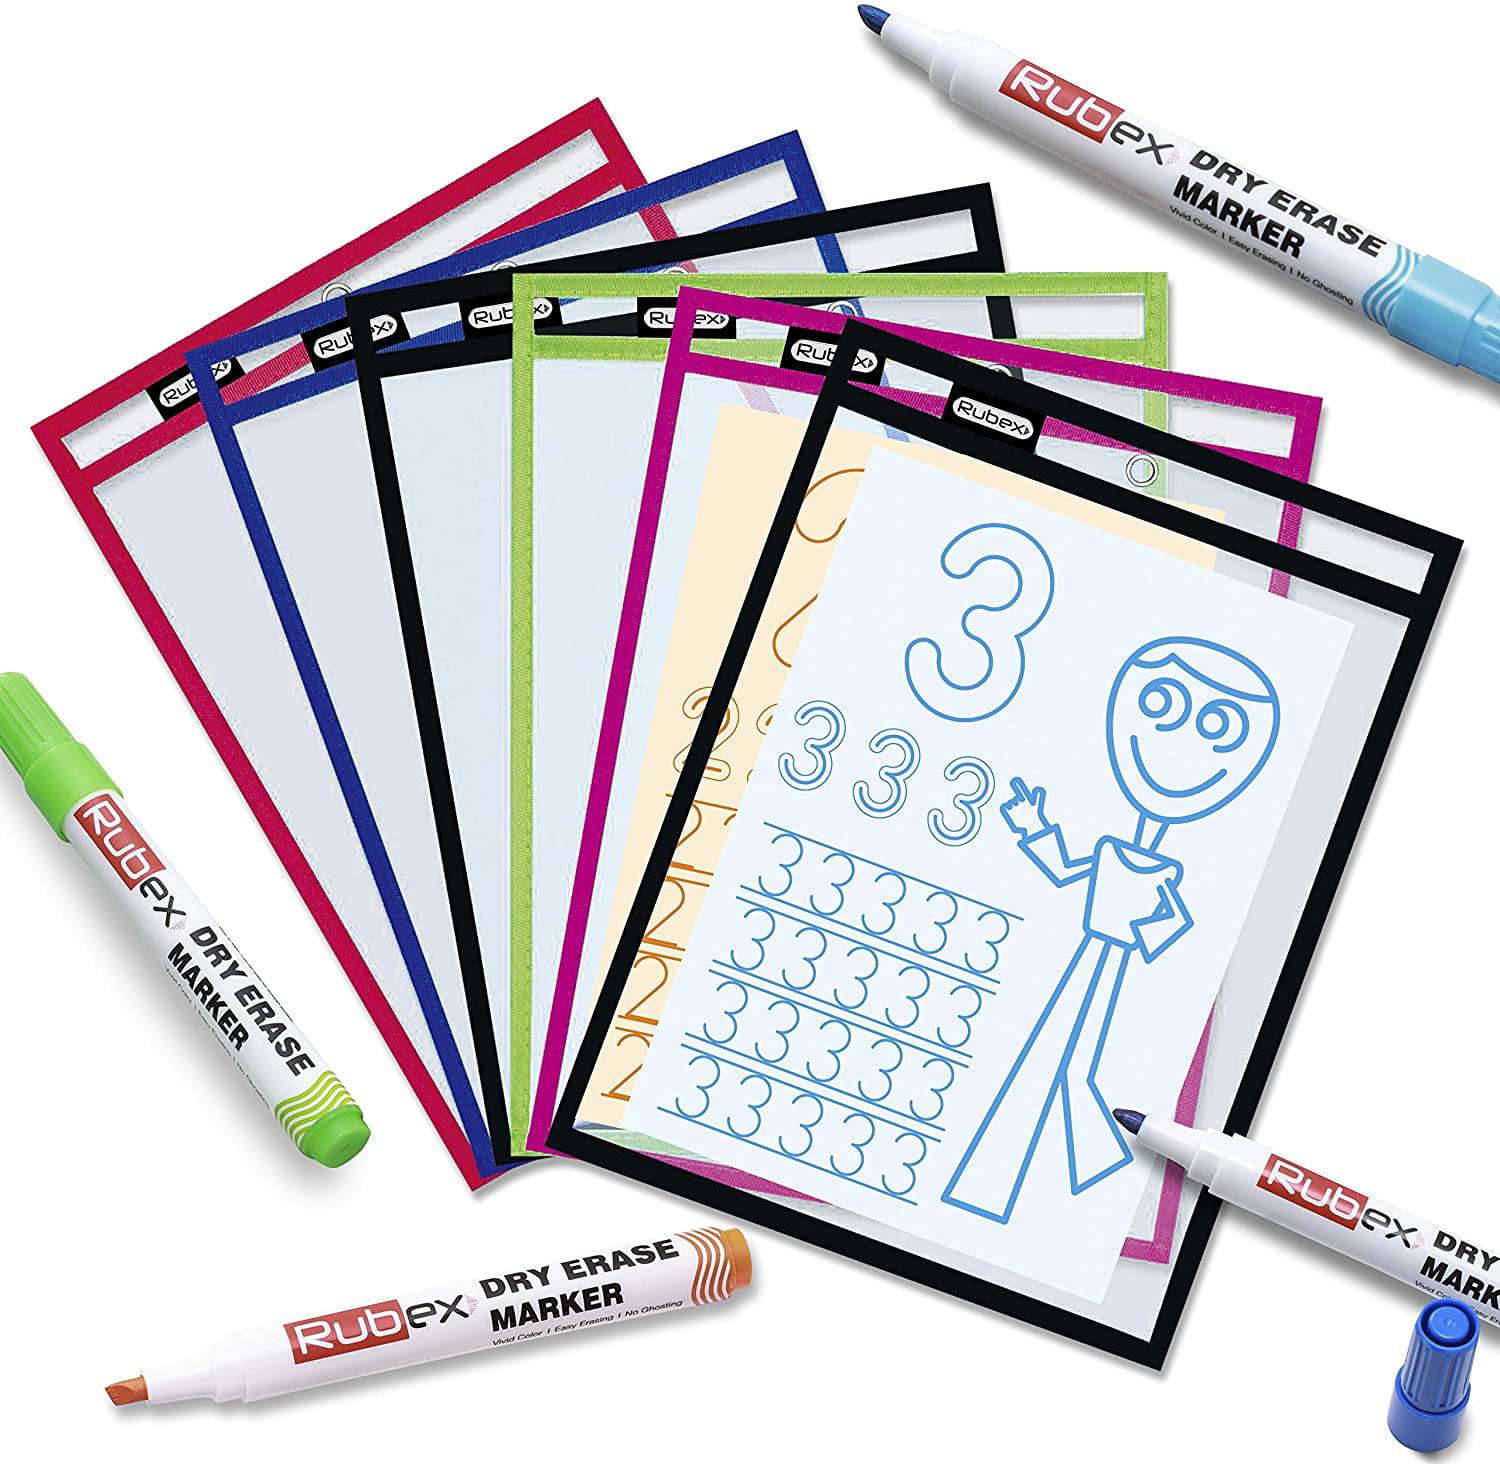 Dry Erase Pockets Sheet Protectors,Ticket Holder Pockets,Multi-Colored Sheets Ideal Clear Plastic Reusable Sleeves,to use for Classroom Organization and Office 10X13 Pack of 10 